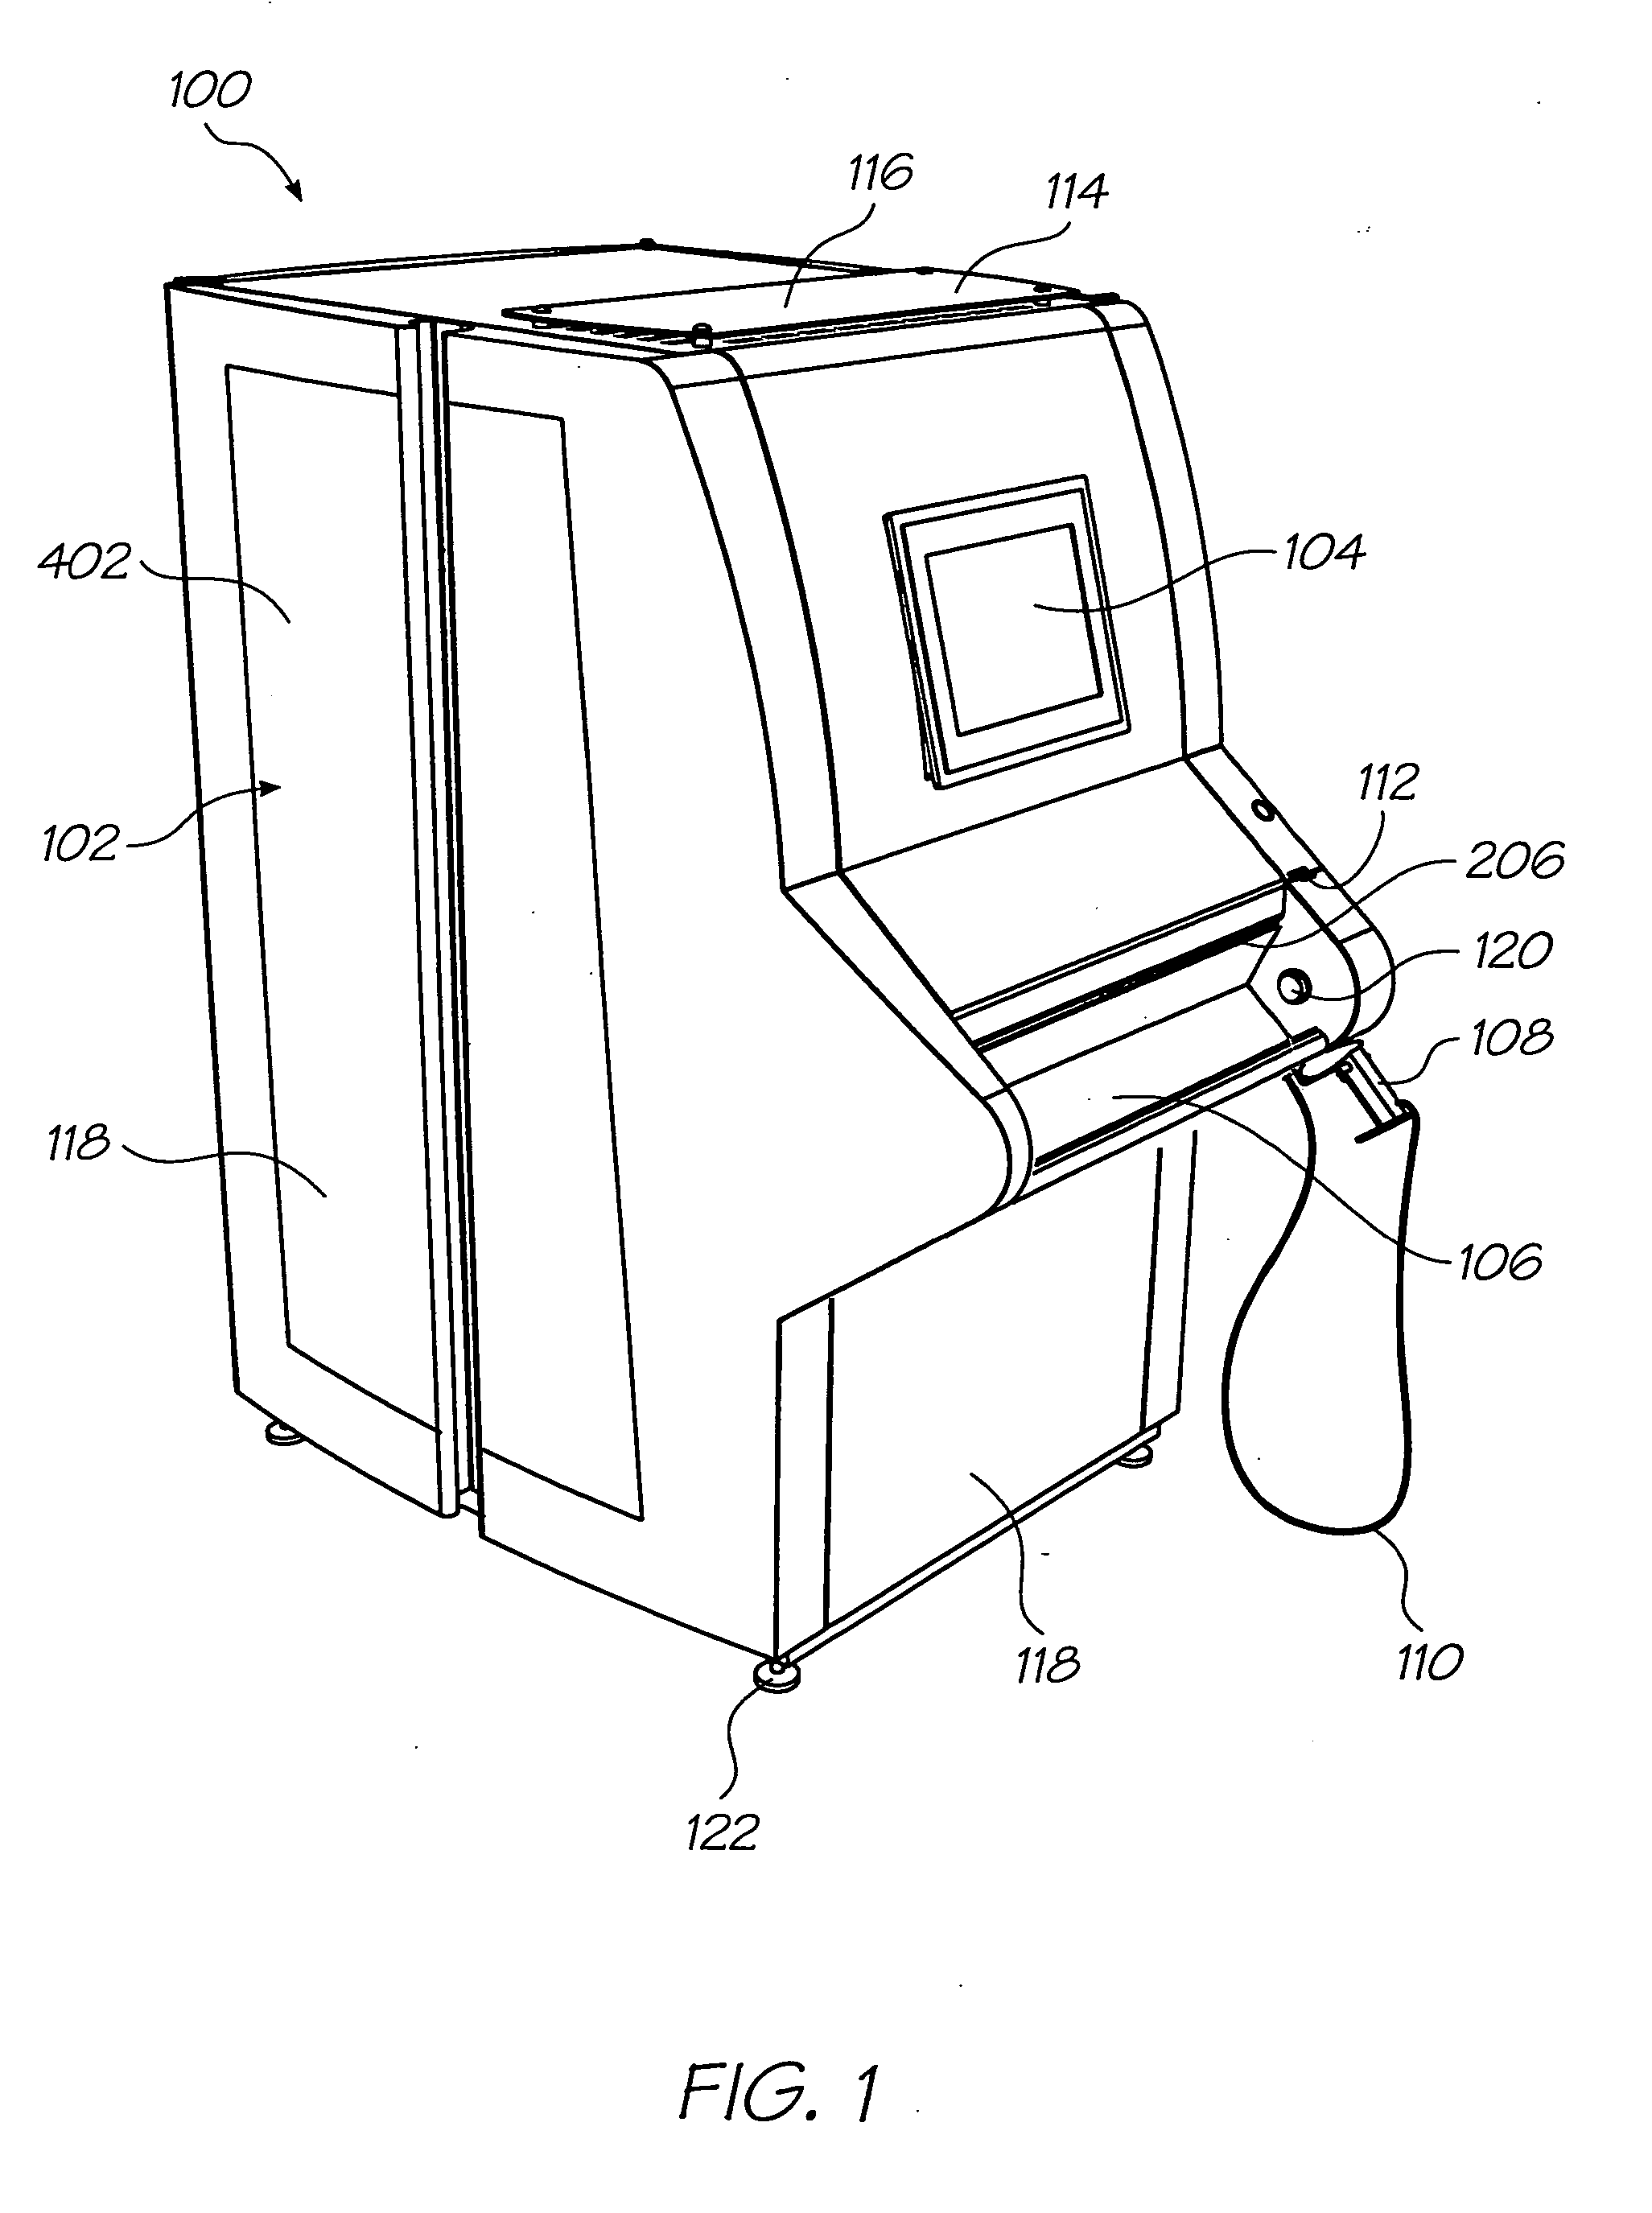 Self contained wallpaper printer